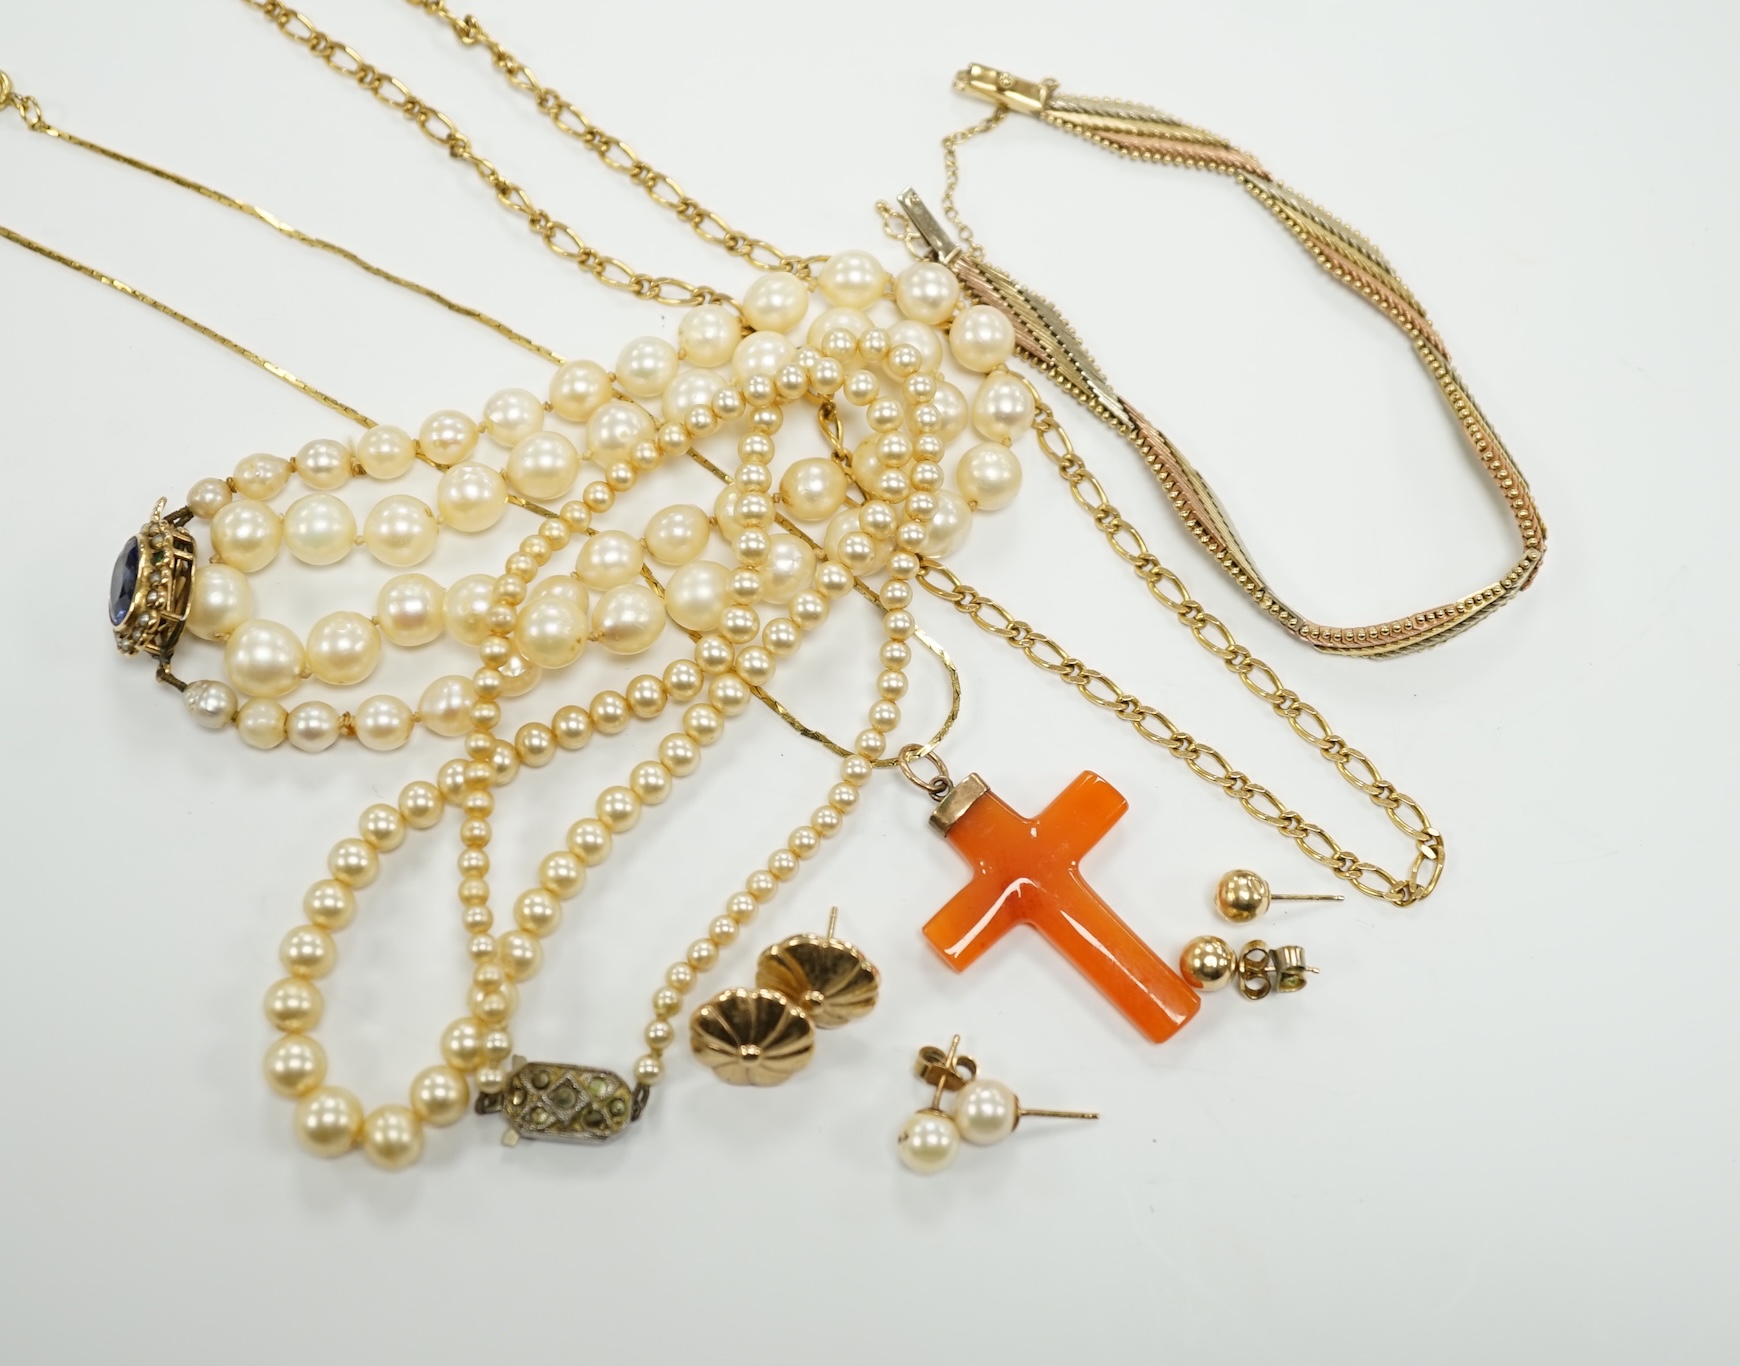 Sundry jewellery including 9ct gold bracelet, 9ct gold chain, three pairs of ear studs, a cultured pearl necklace, a carnelian cross pendant on chain and a simulated pearl necklace.